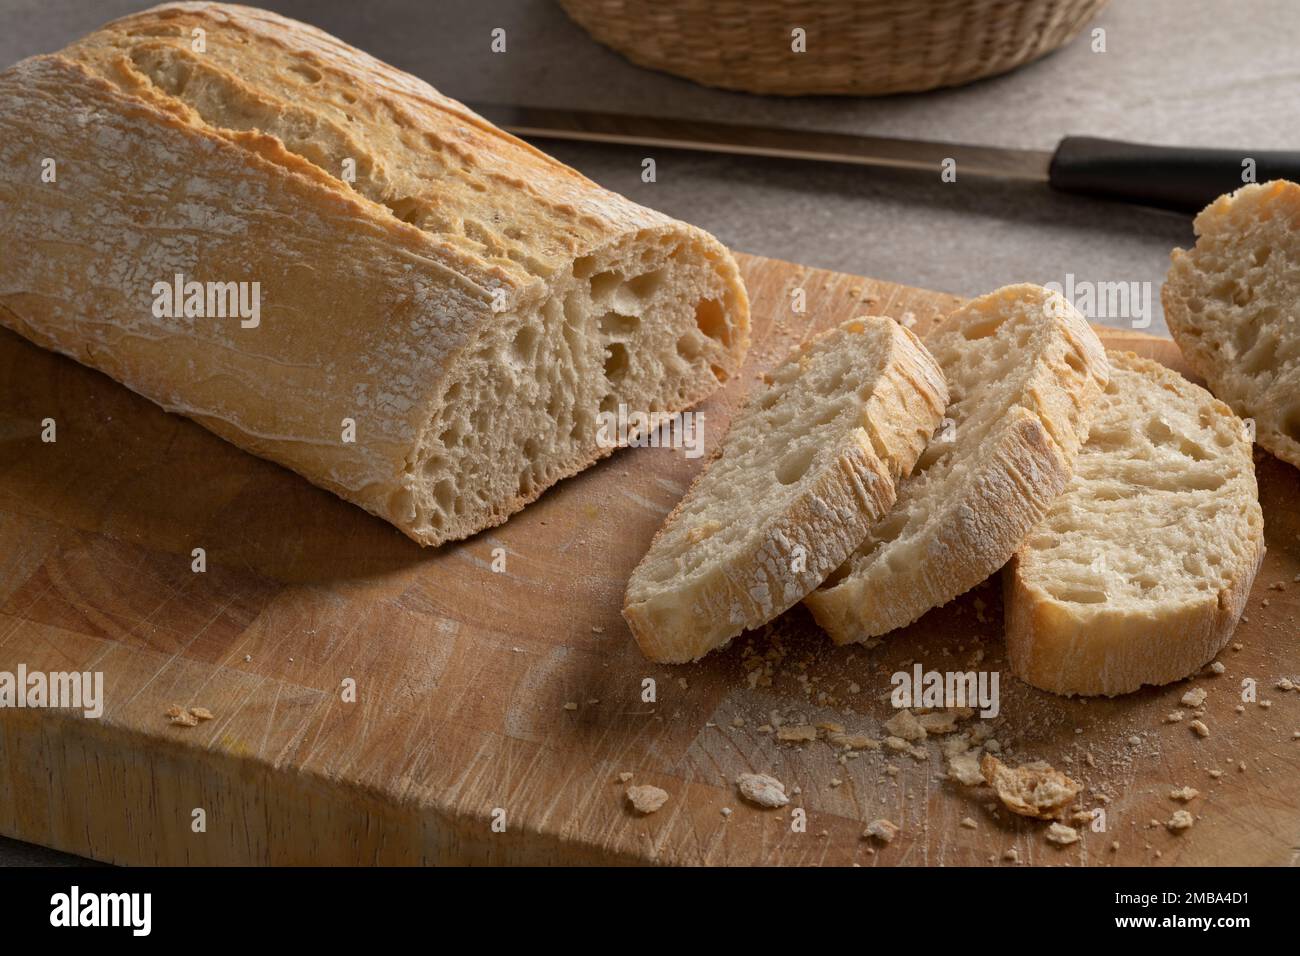 Traditional Italian fresh baked ciabatta bread and slices on a cutting board close up Stock Photo